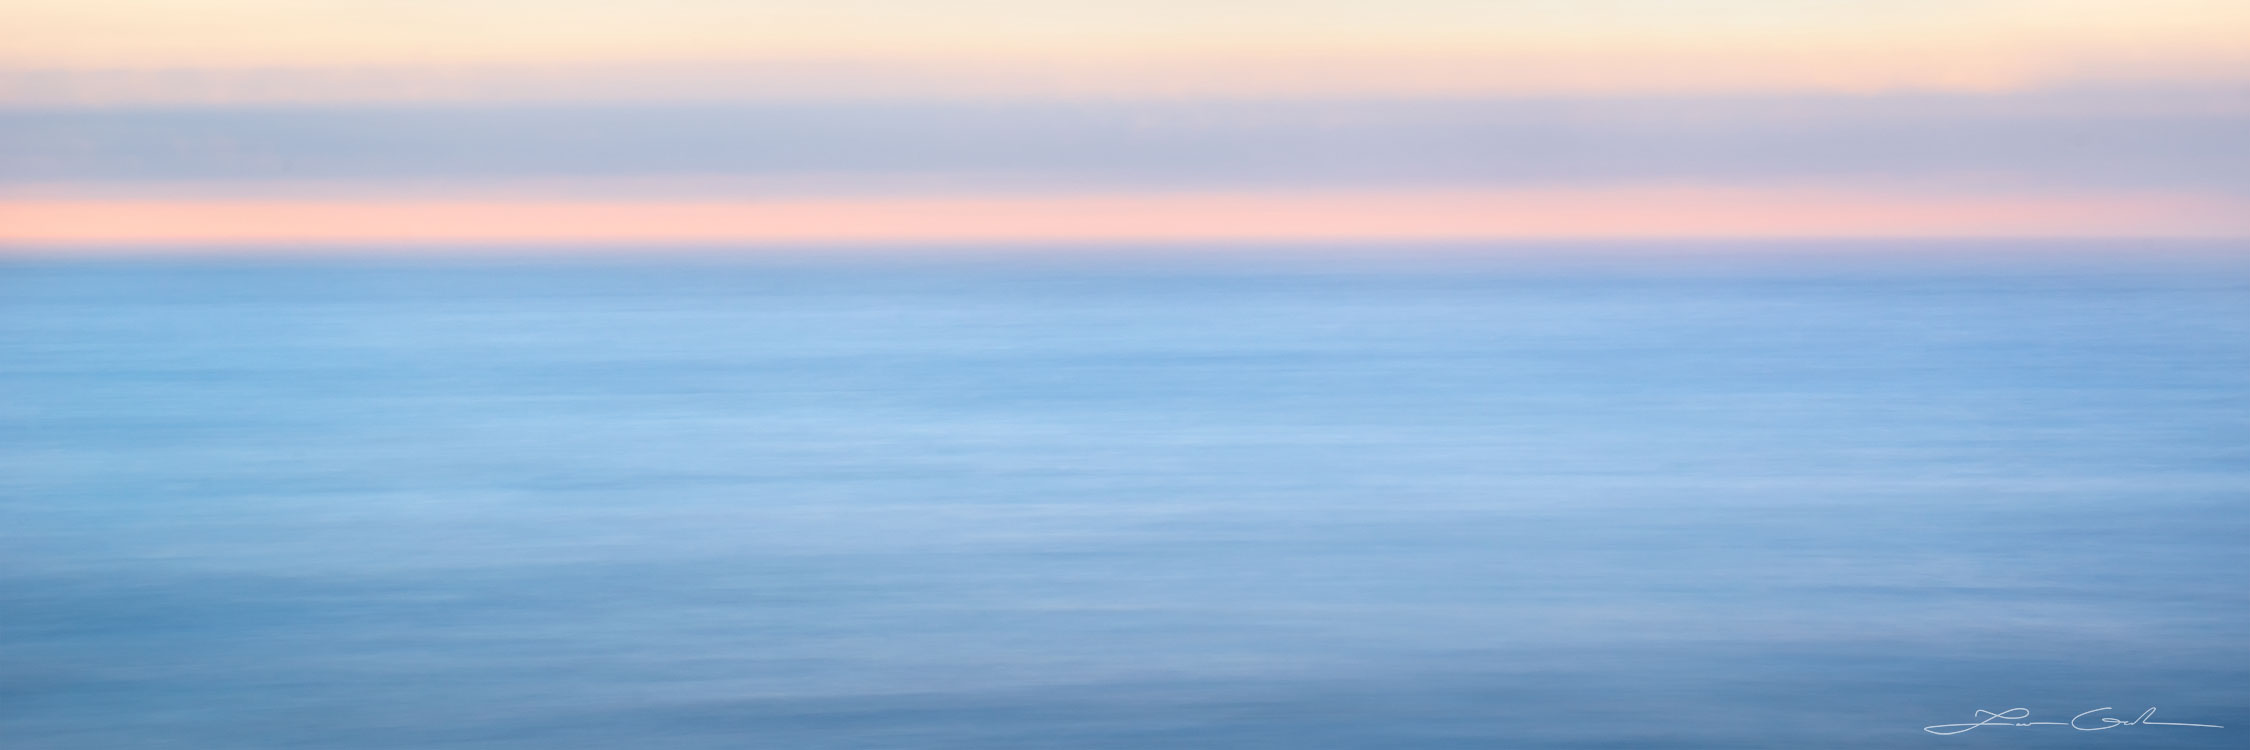 A smooth blue ocean panorama at sunrise - Gintchin Fine Art